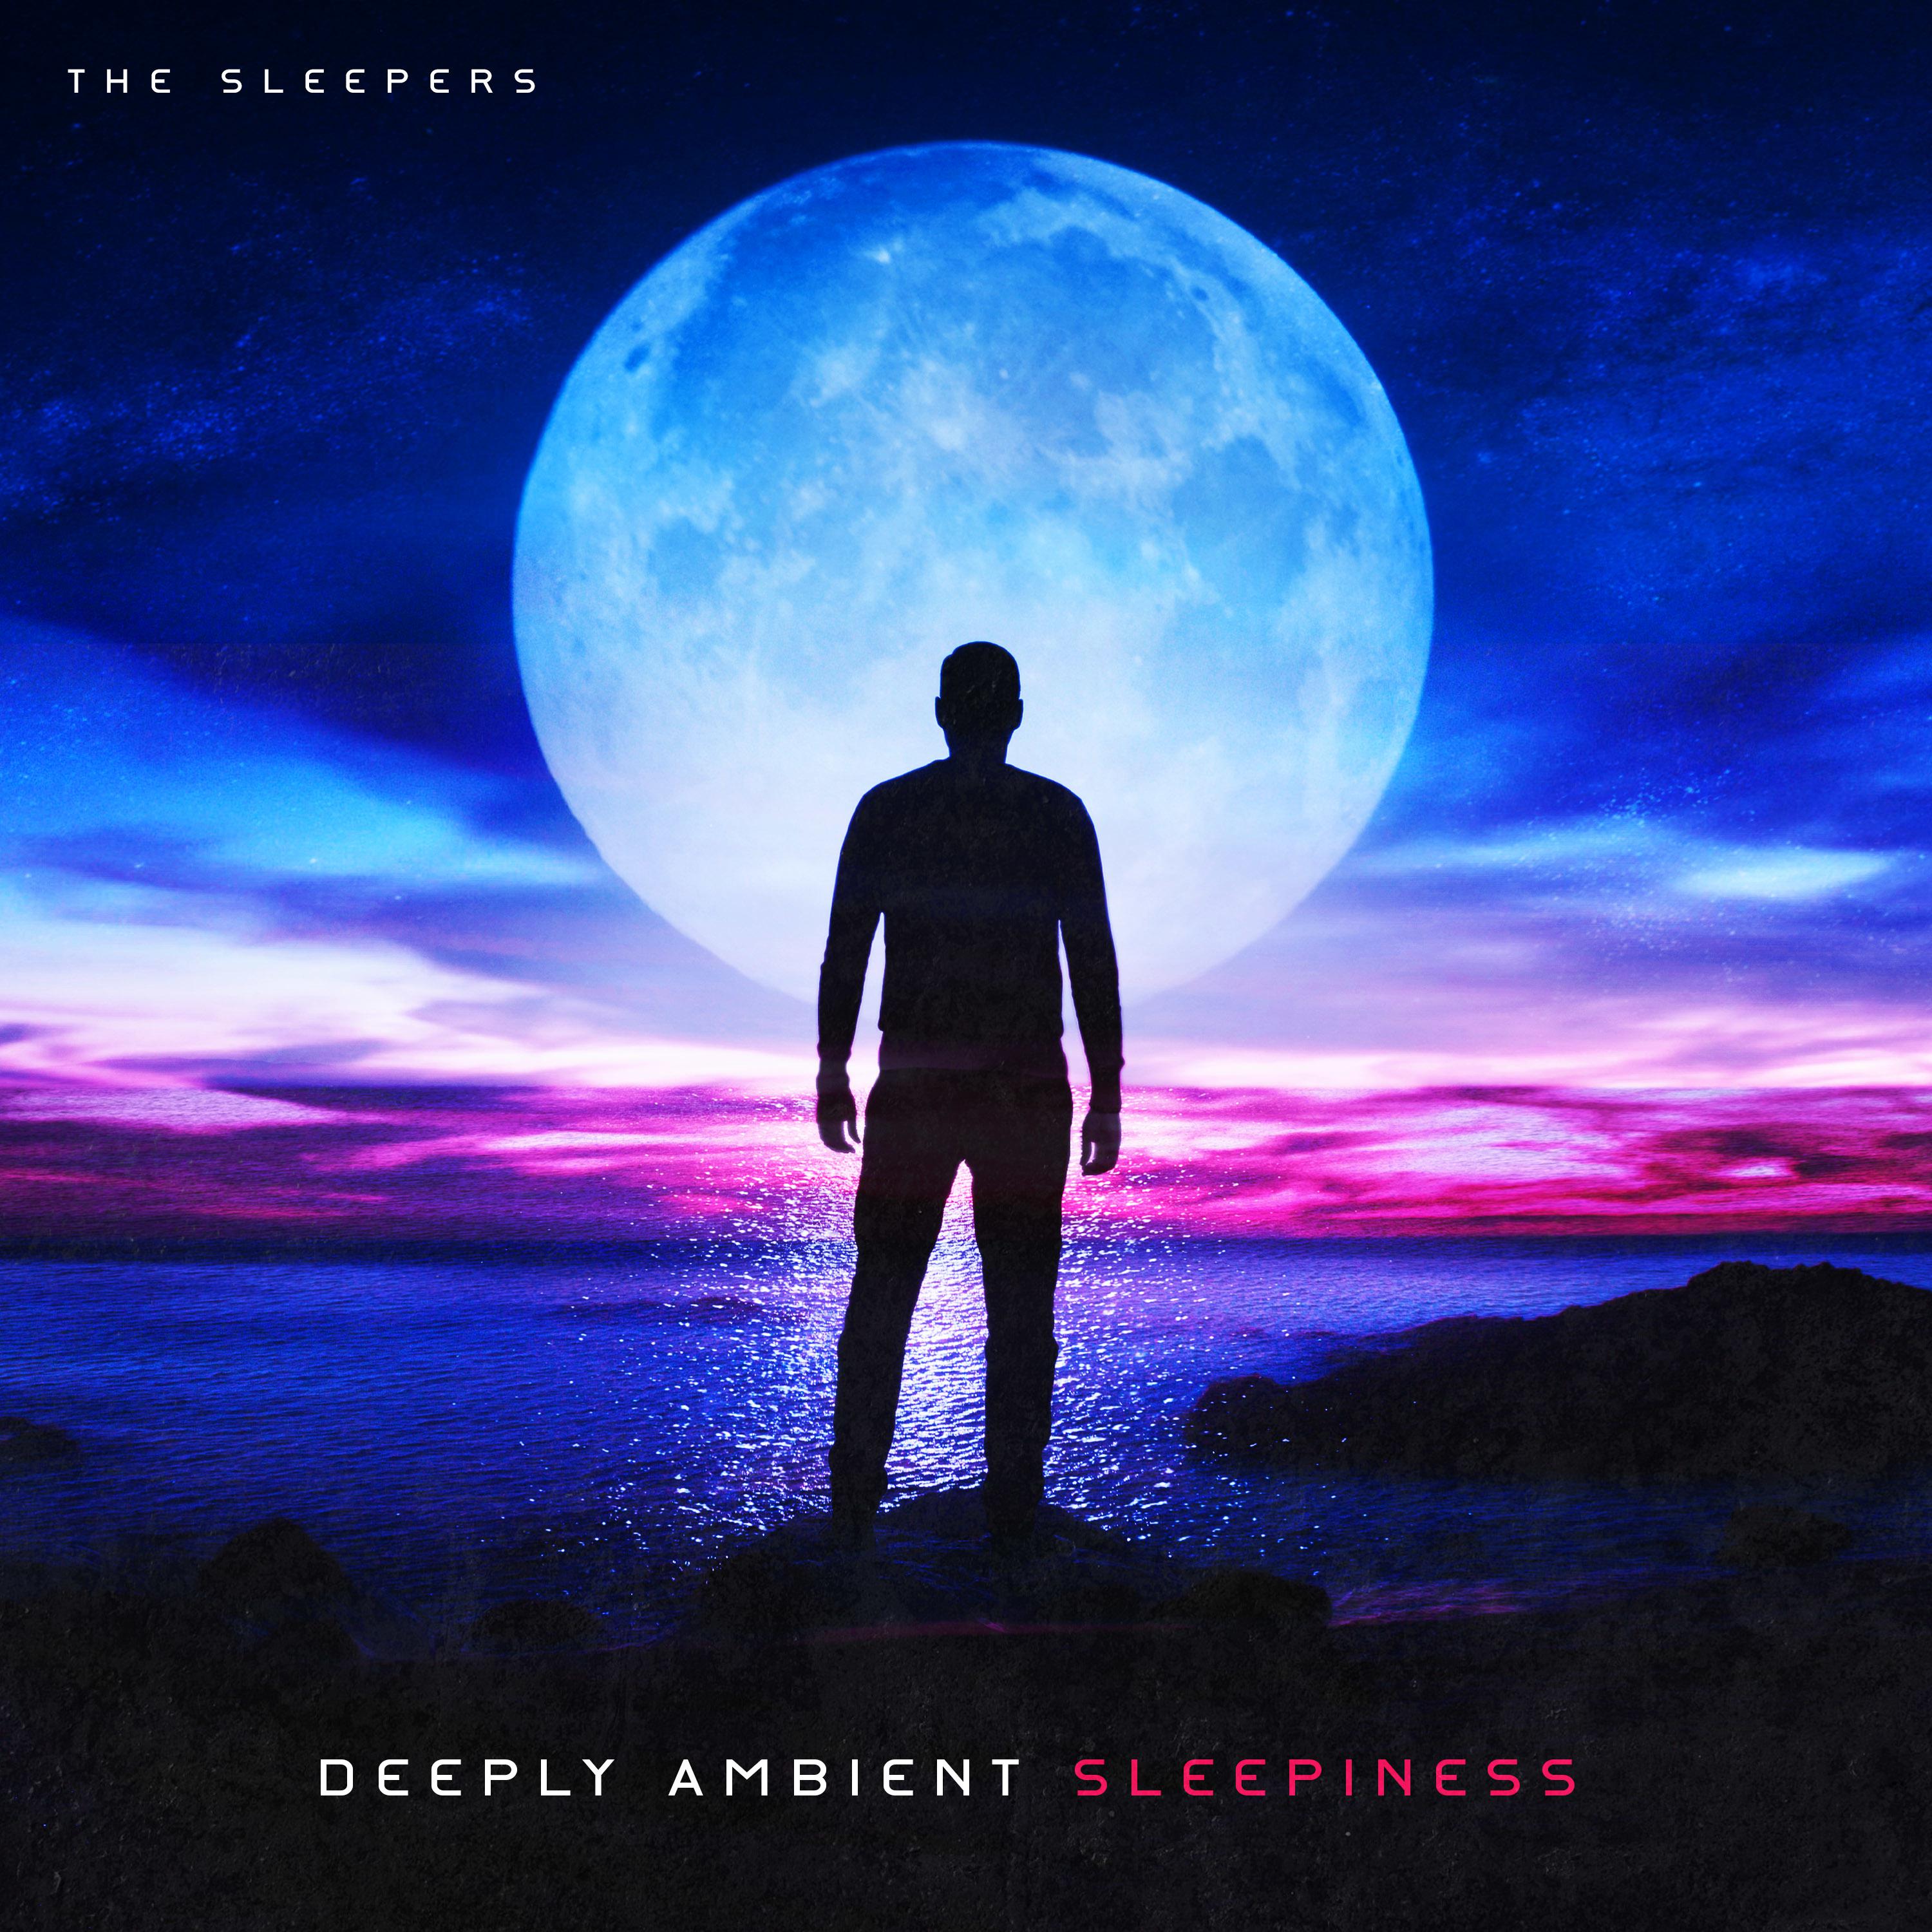 The Sleepers - Pure Lulling